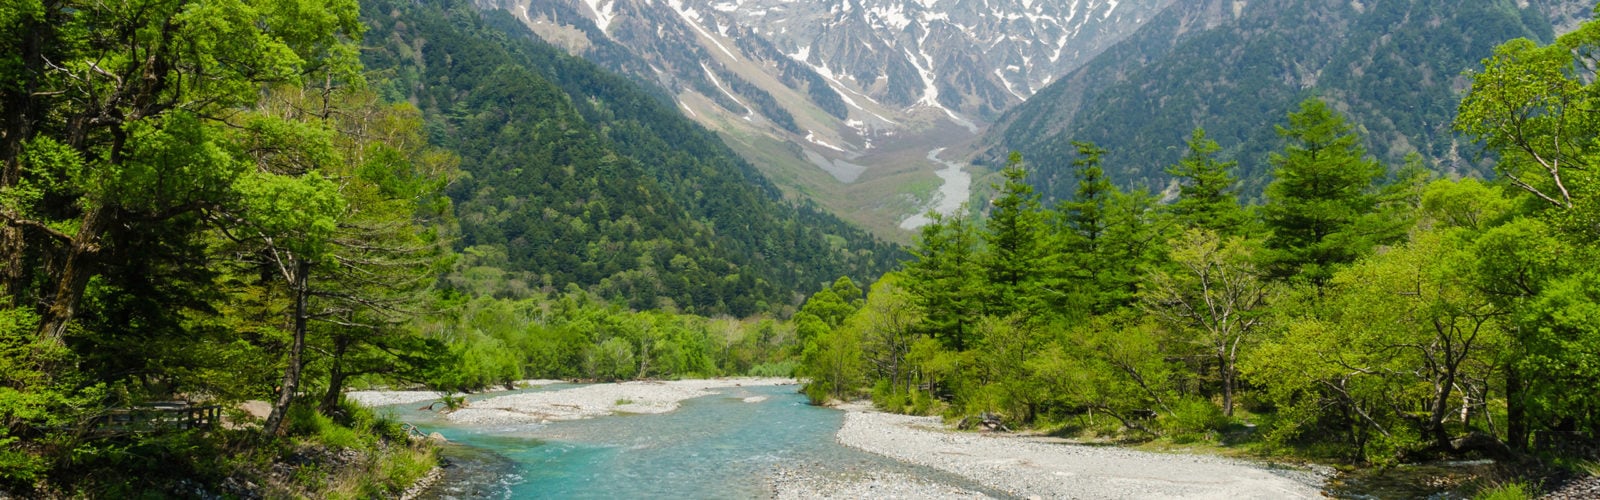 japanese-alps-river-and-mountain